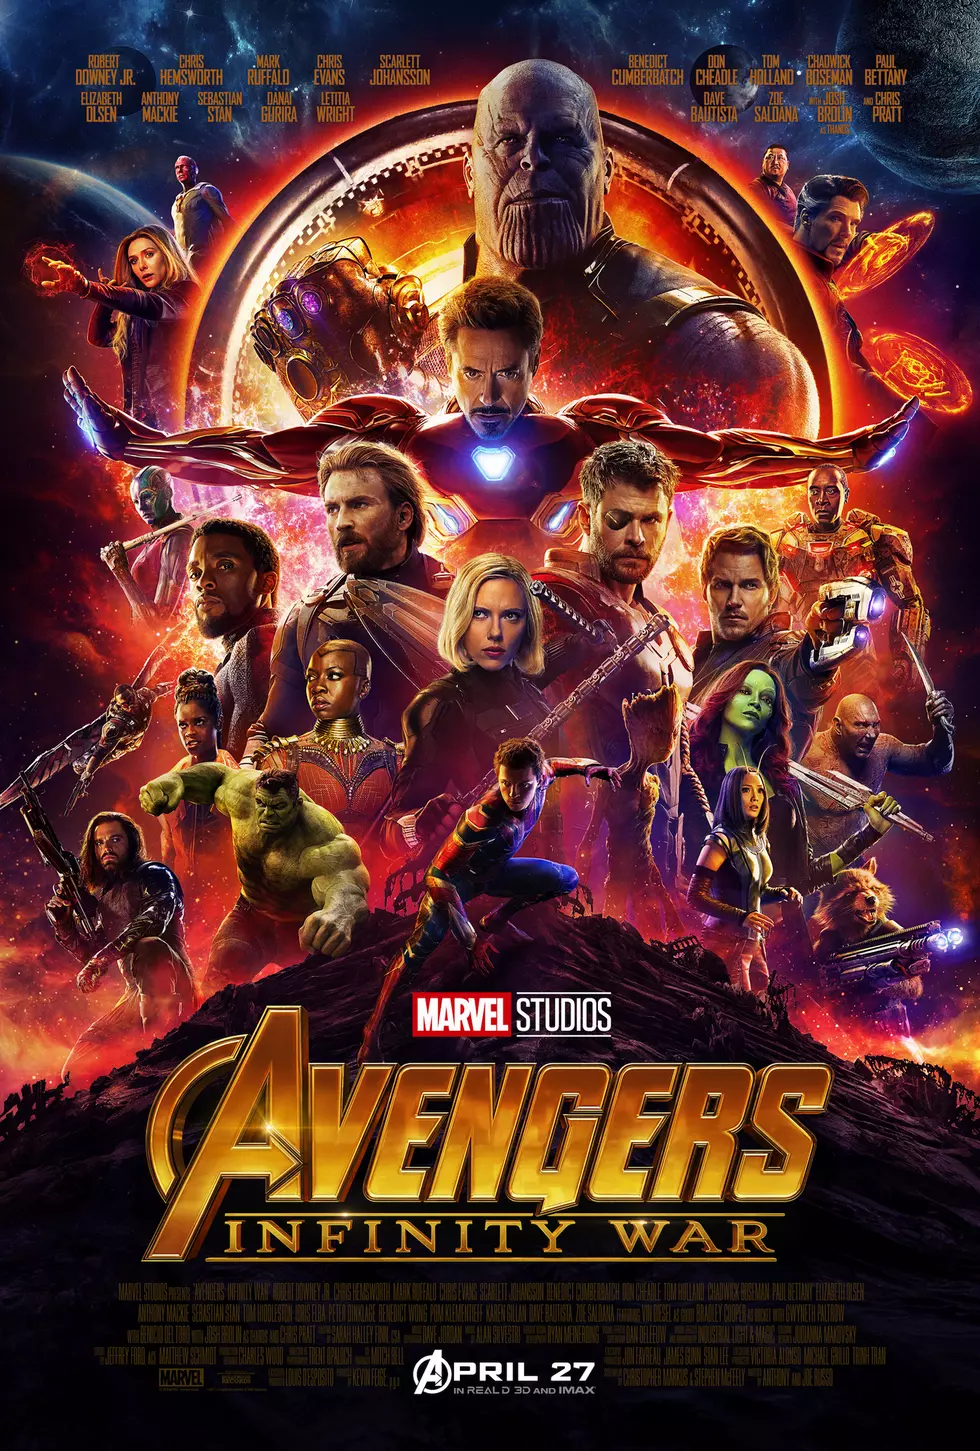 Avengers Infinity War is Here: Win Tickets All This Week